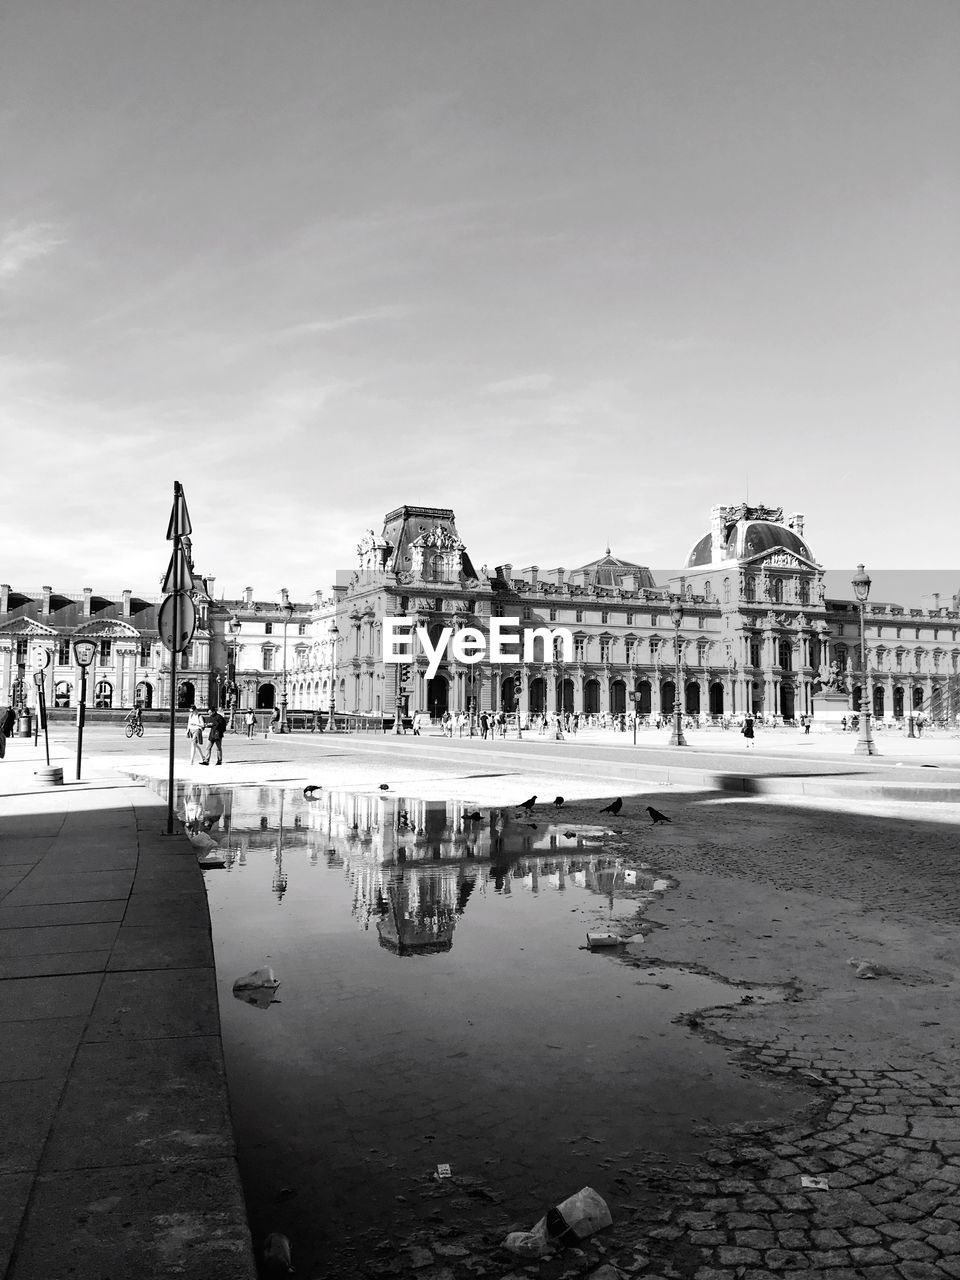 The louvre reflecting in puddle on street